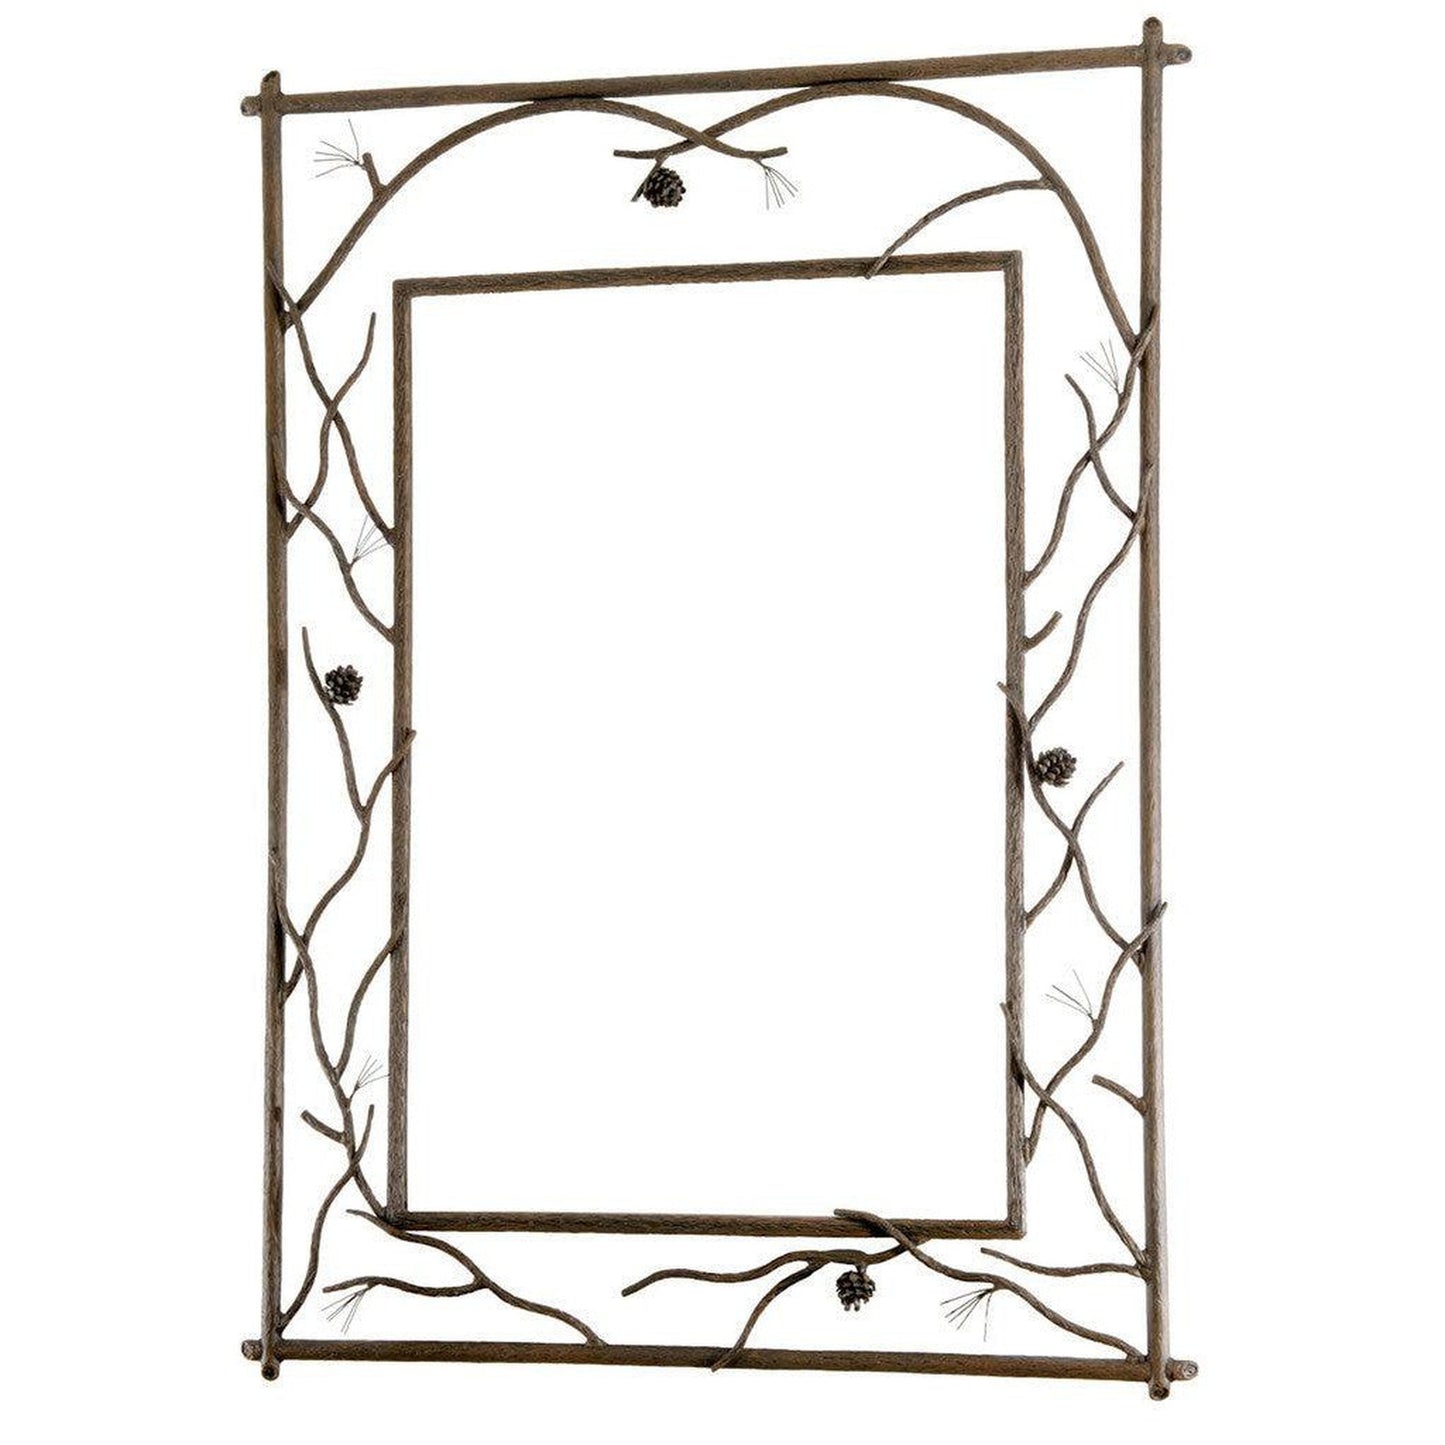 Stone County Ironworks Pine 29" x 35" Small Satin Black Branched Iron Wall Mirror With Copper Iron Accent